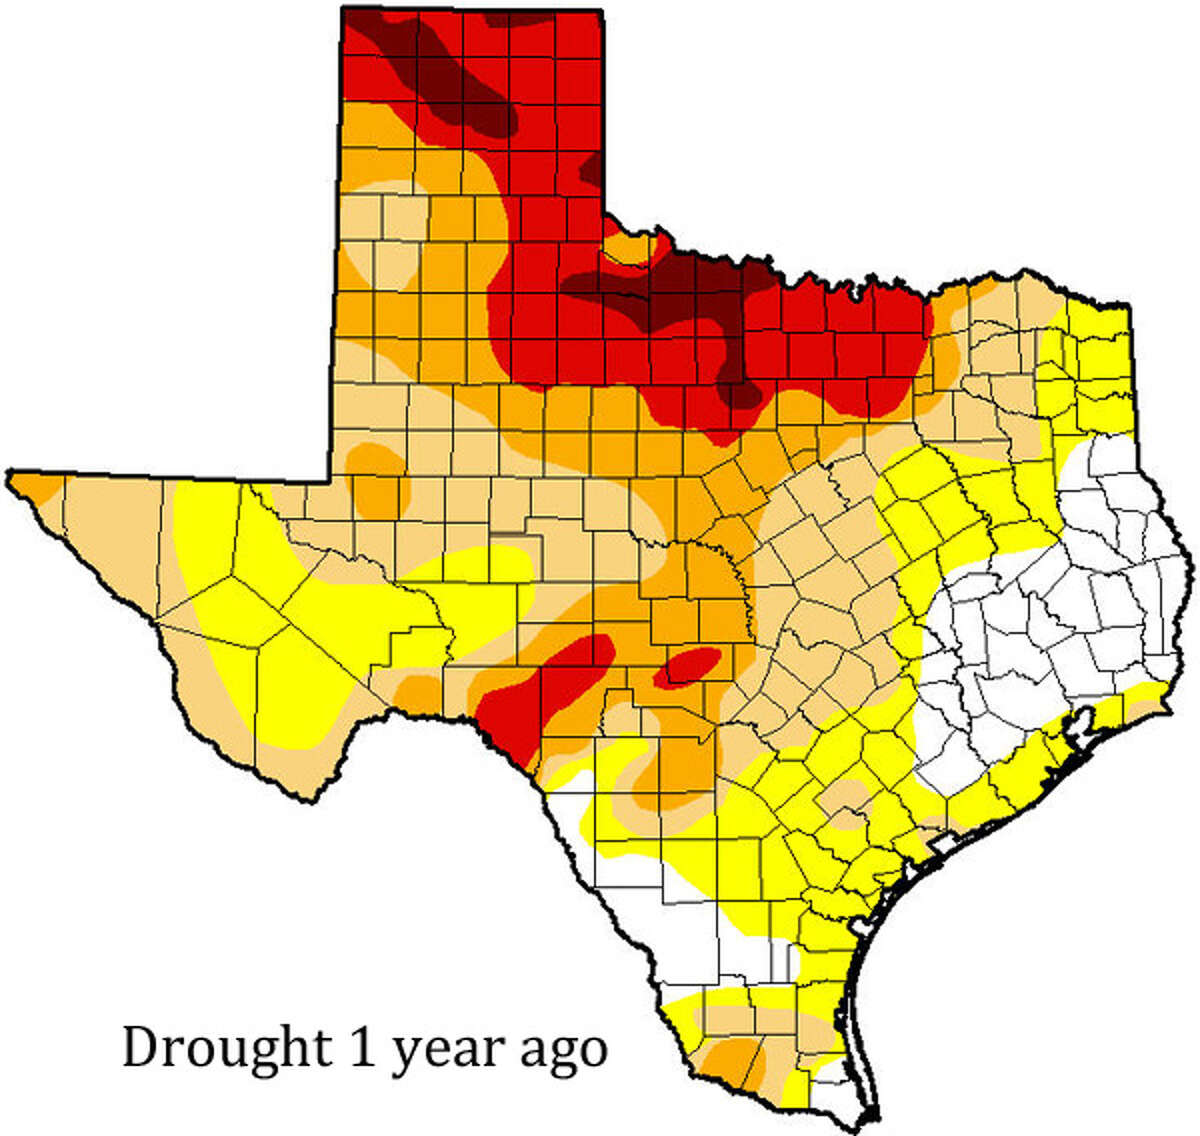 U.S. Drought Monitor map of Texas drought conditions as of July 15, 2014.White areas reflect no drought presence, with darker colors reflecting worsening stages of drought from "Abnormally Dry" (yellow) to "Exceptional Drought" (brown).